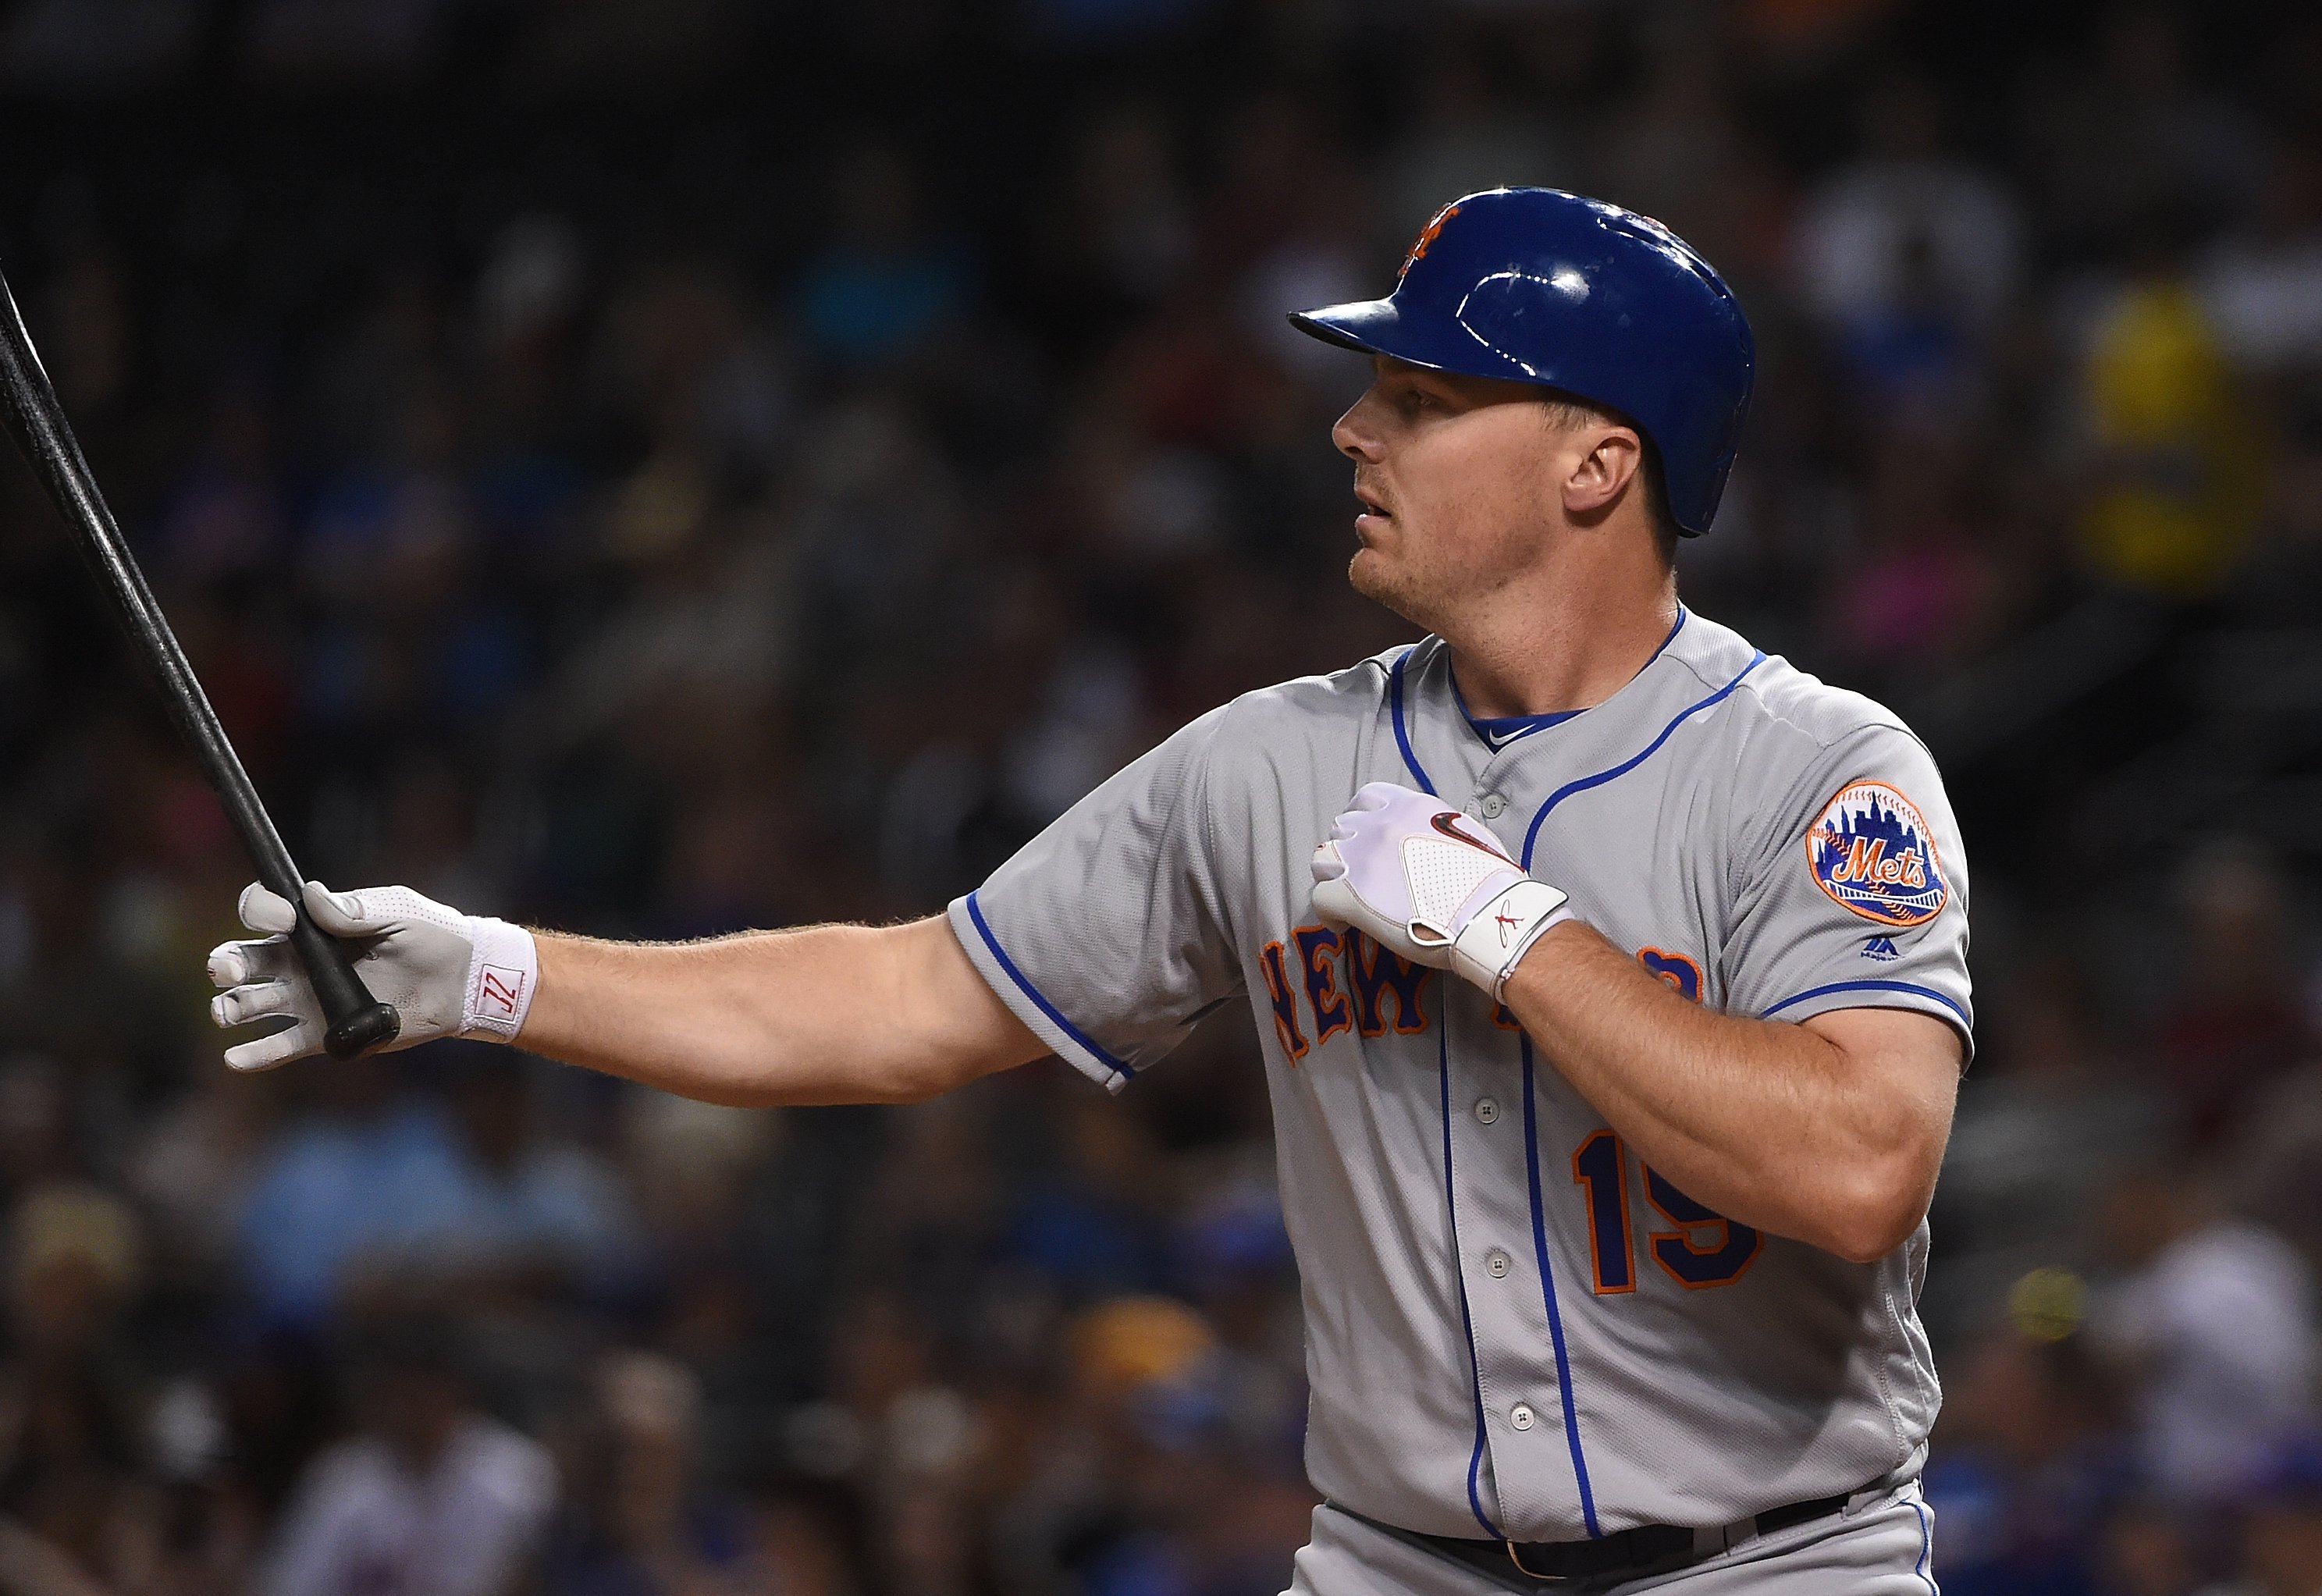 Mets have talented tandem in Conforto and Nimmo